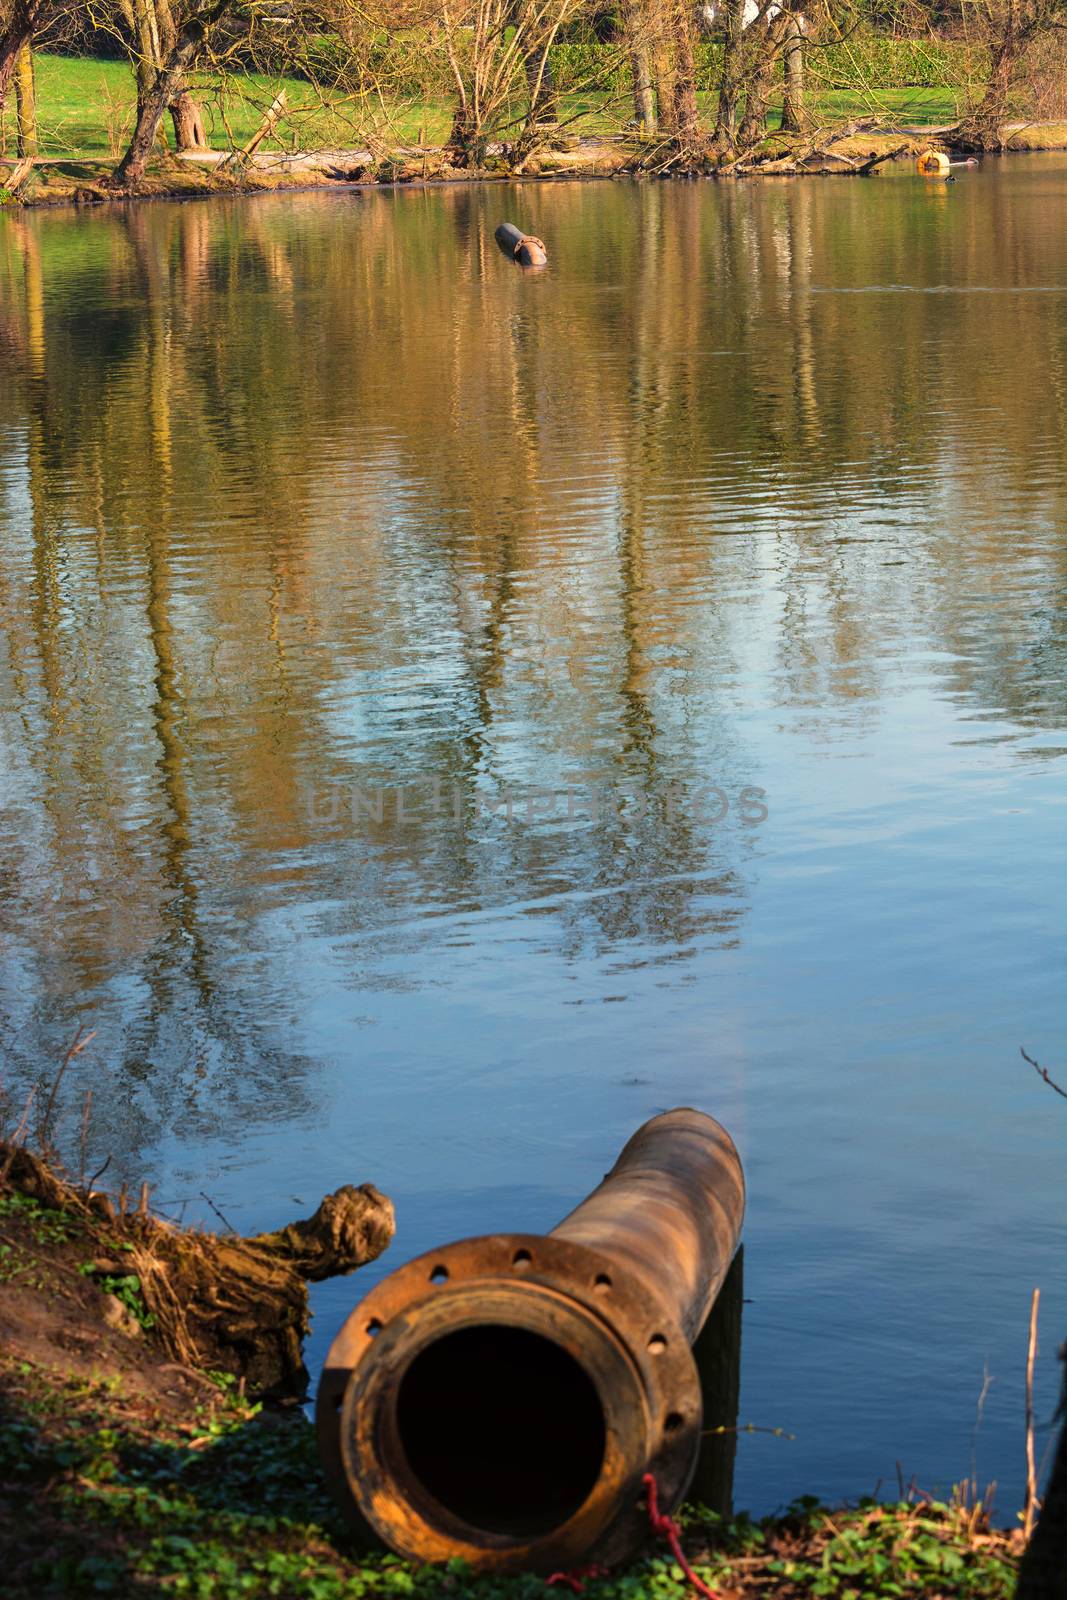 Pipeline, plastic pipes float on the water surface.